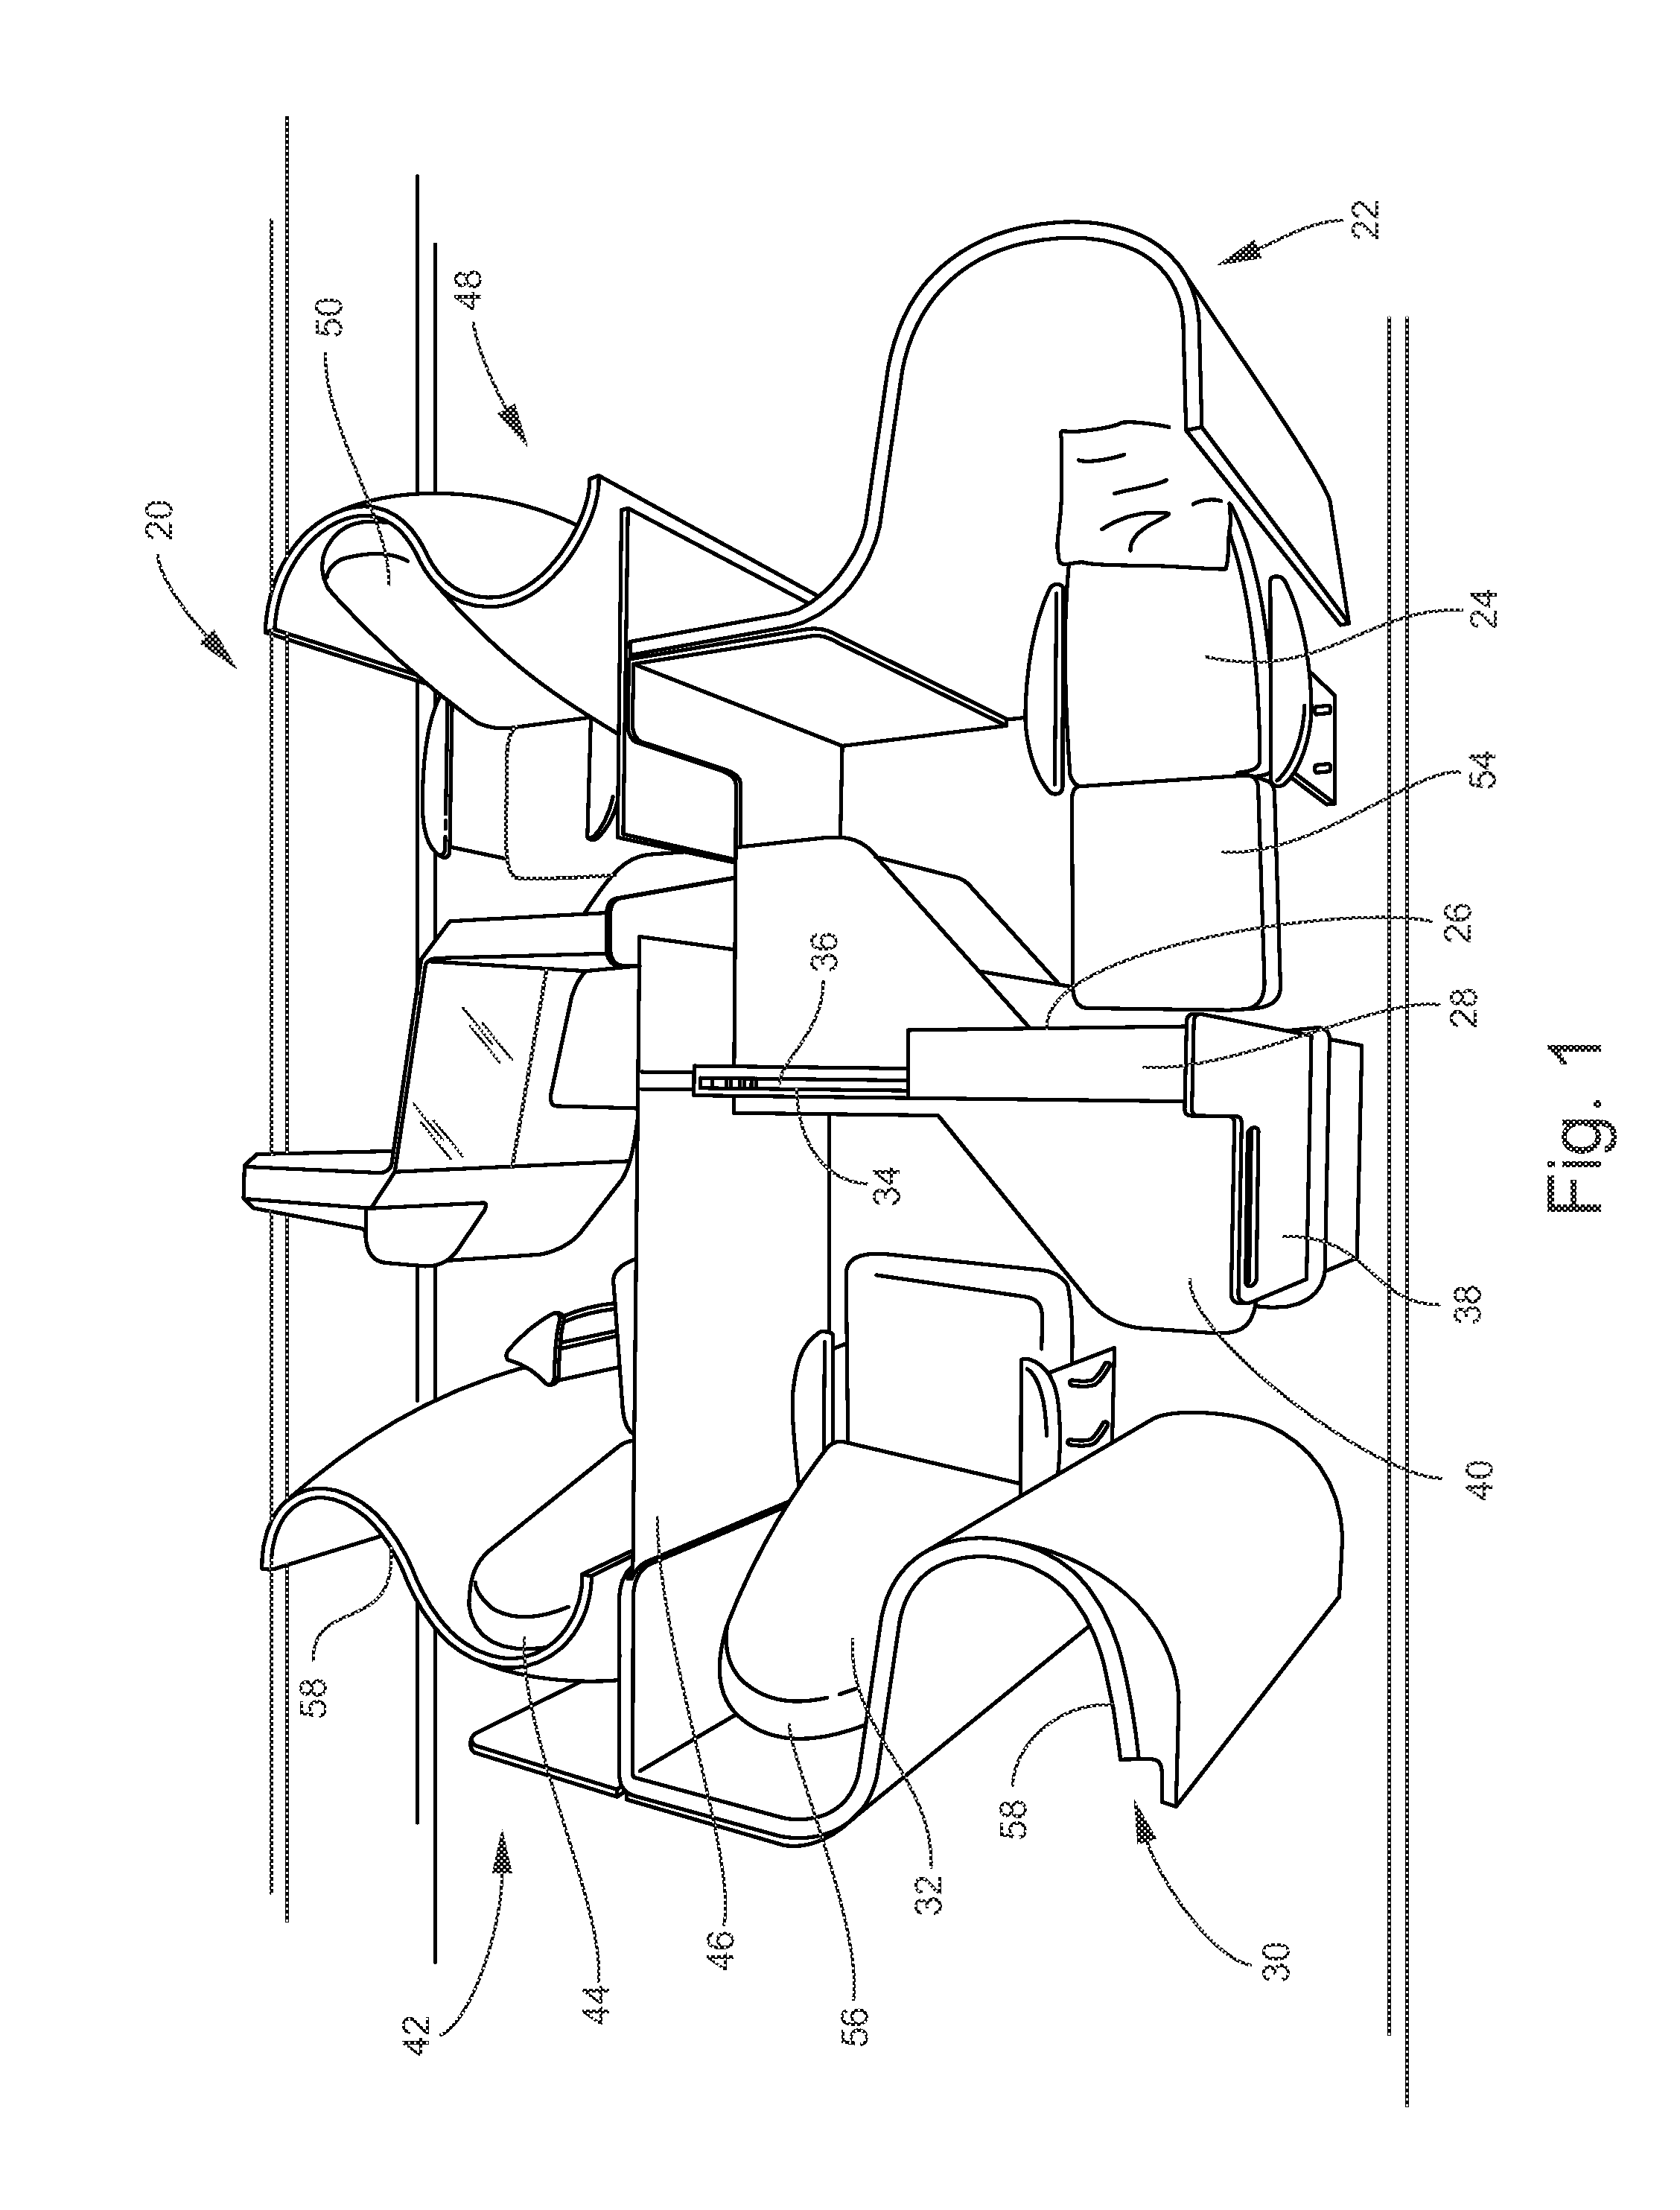 Passenger suite seating arrangement with moveable video monitor